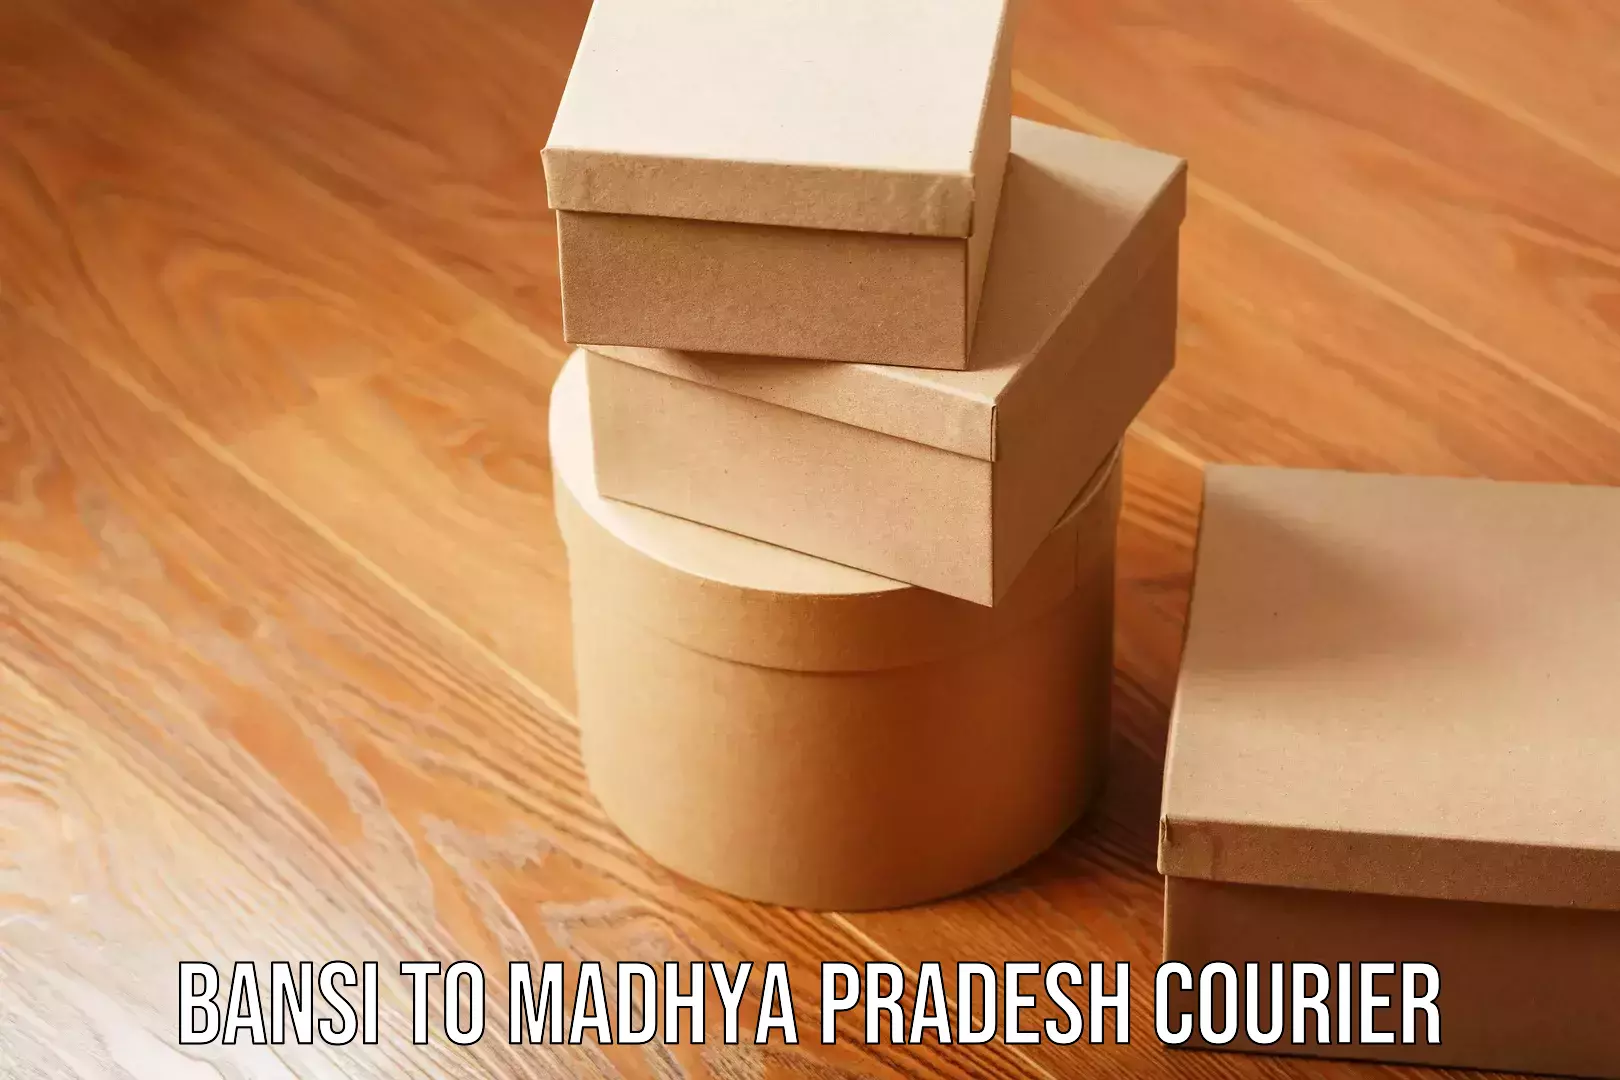 24-hour courier services Bansi to Madhya Pradesh